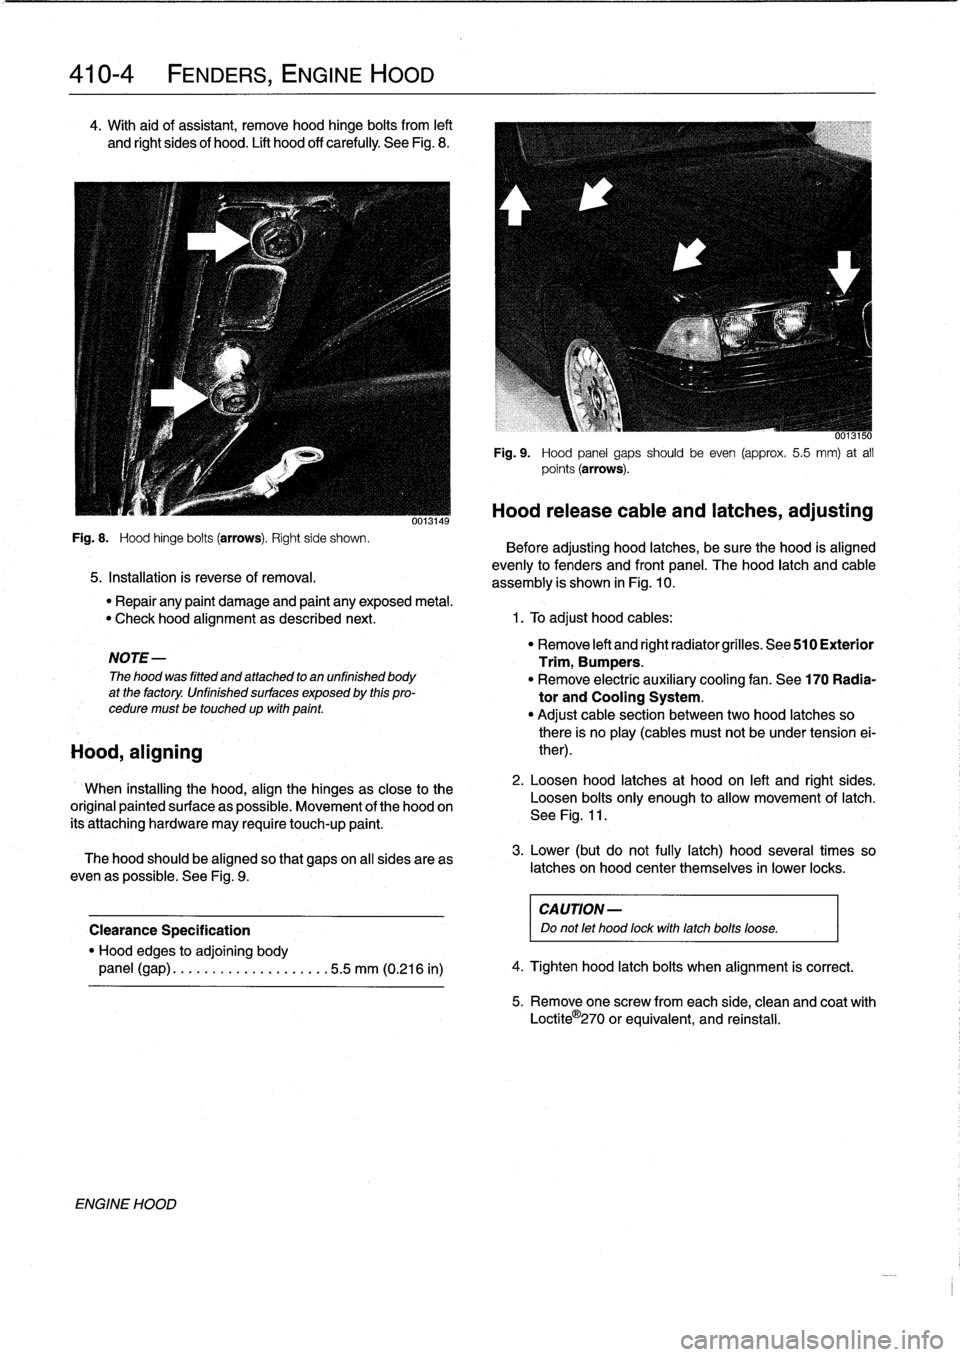 BMW 323i 1993 E36 Workshop Manual 
410-4

	

FENDERS,
ENGINE
HOOD

4
.
With
aid
of
assistant,
remove
hood
hinge
bolts
from
left

and
Rght
sides
of
hood
.
Lift
hood
off
carefully
See
Fig
.
8
.

Fig
.
8
.

	

Hood
hinge
bolts
(arrows)
.